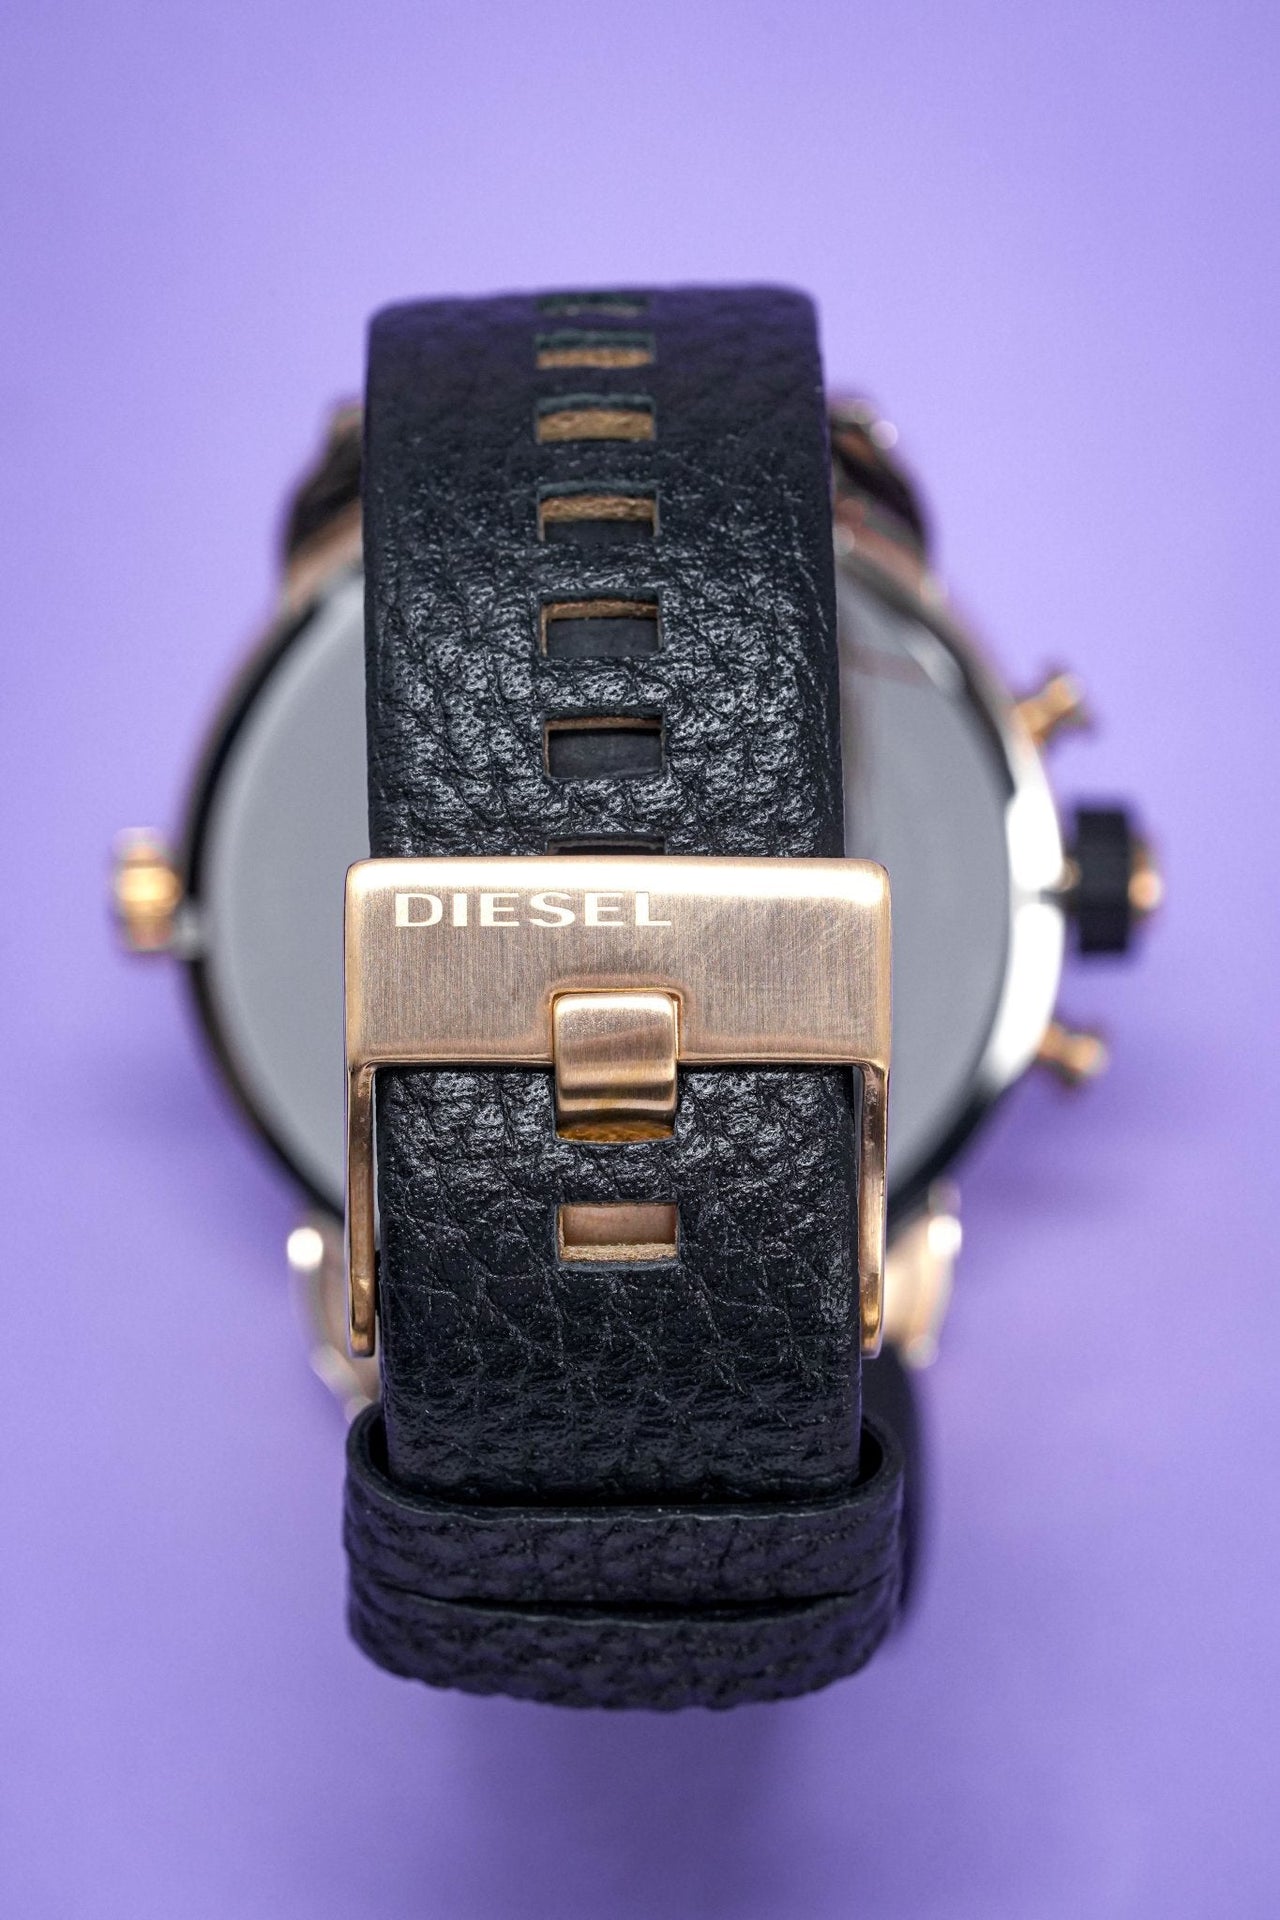 Diesel Men's Chronograph Watch Little Daddy Rose Gold - Watches & Crystals